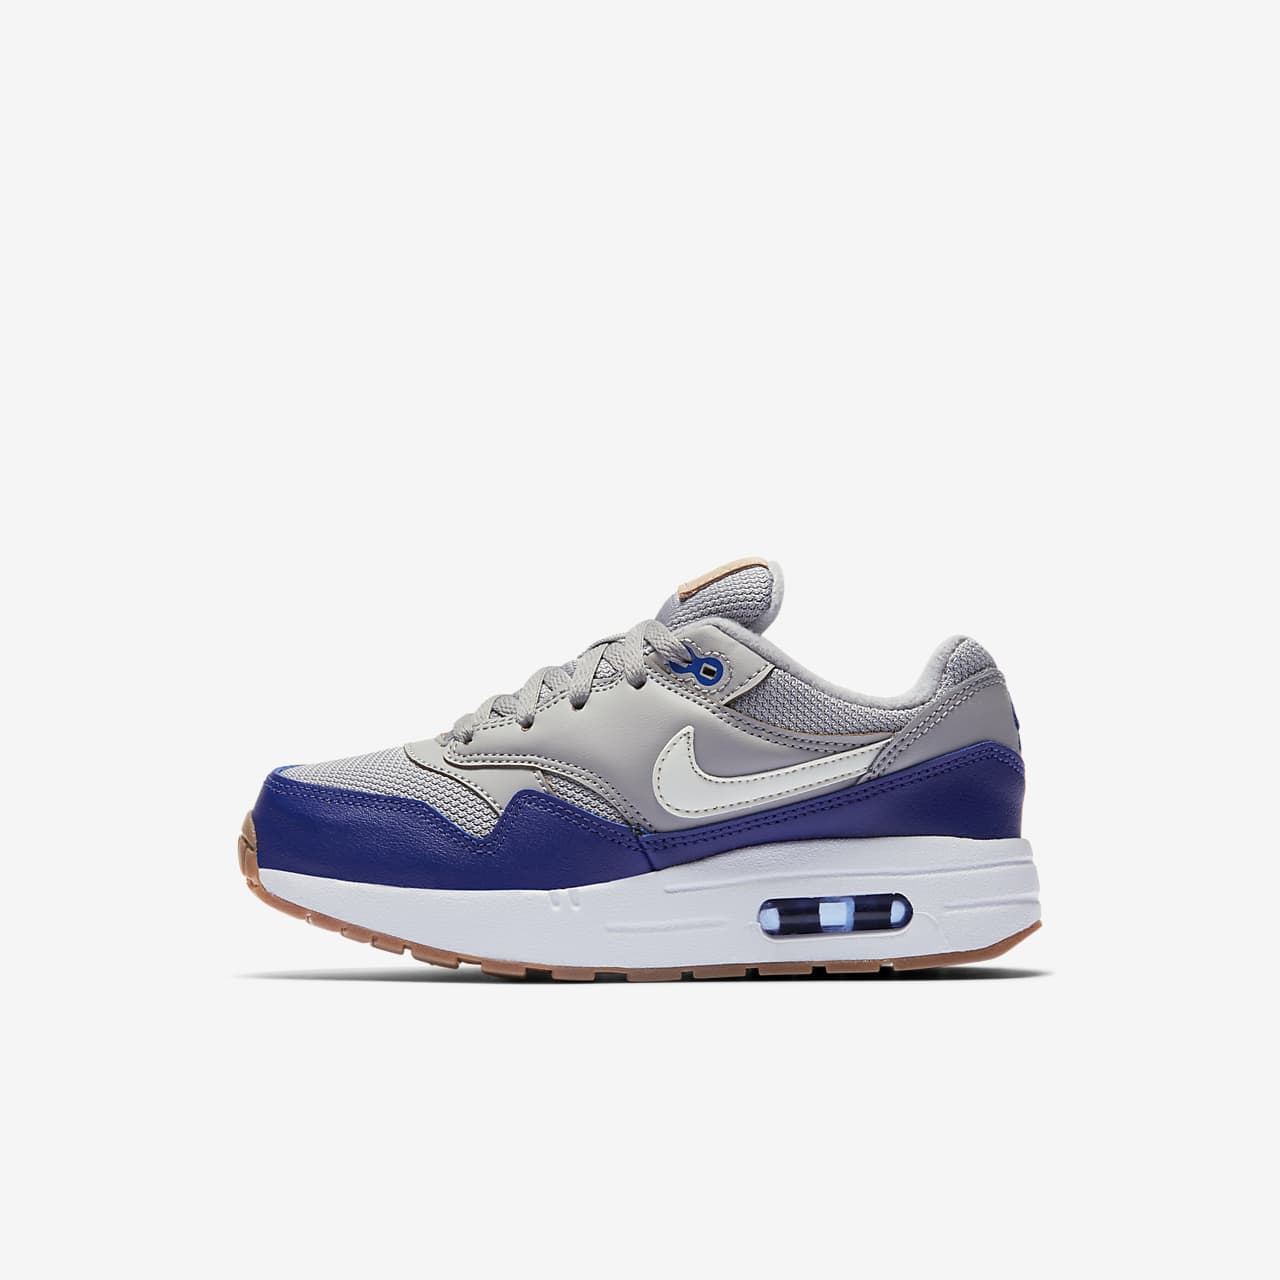 Nike Air Max 1 Younger Kids' Shoe. Nike HR